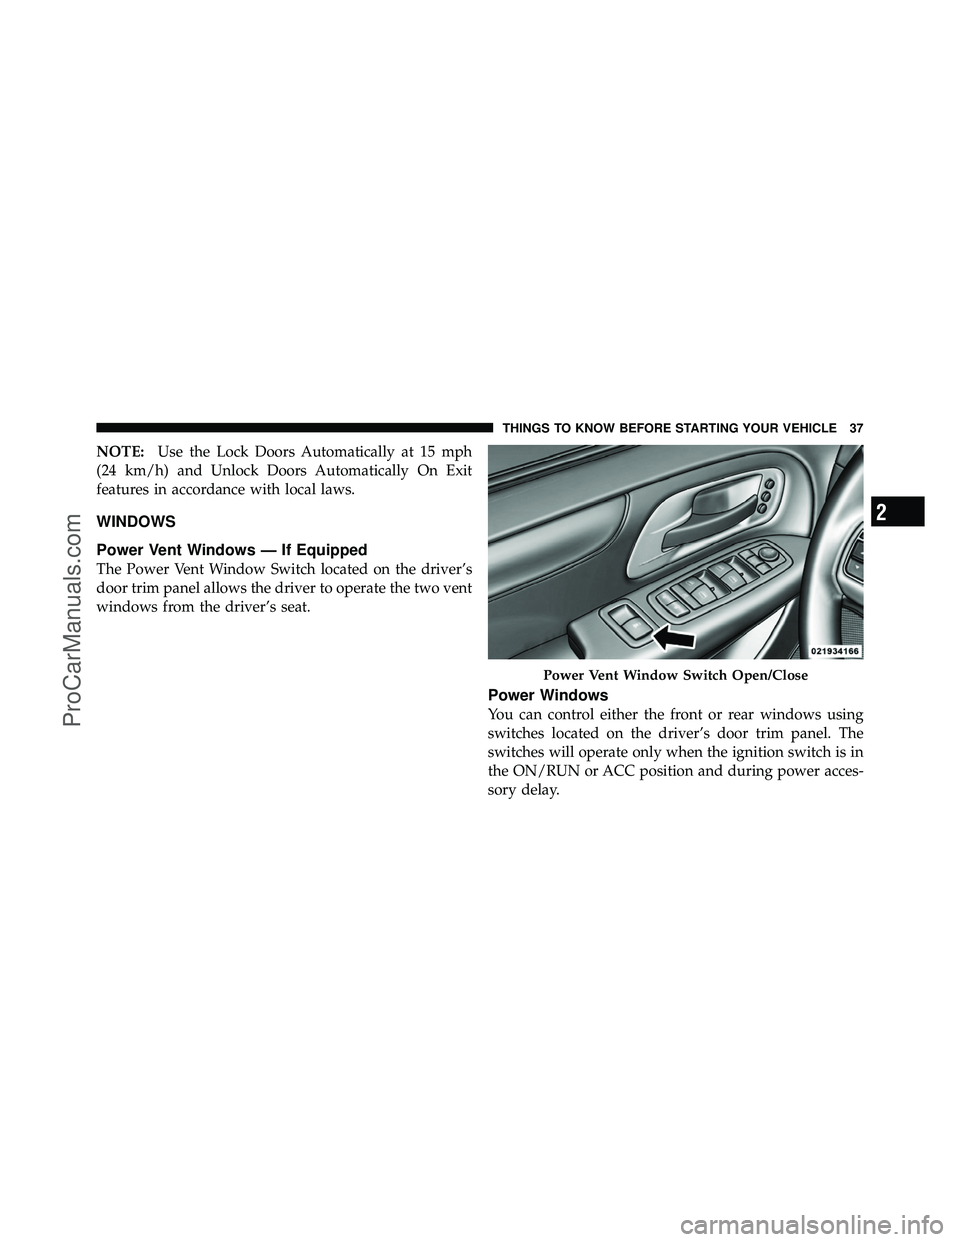 DODGE CARAVAN 2011 Owners Guide NOTE:Use the Lock Doors Automatically at 15 mph
(24 km/h) and Unlock Doors Automatically On Exit
features in accordance with local laws.
WINDOWS
Power Vent Windows — If Equipped
The Power Vent Windo